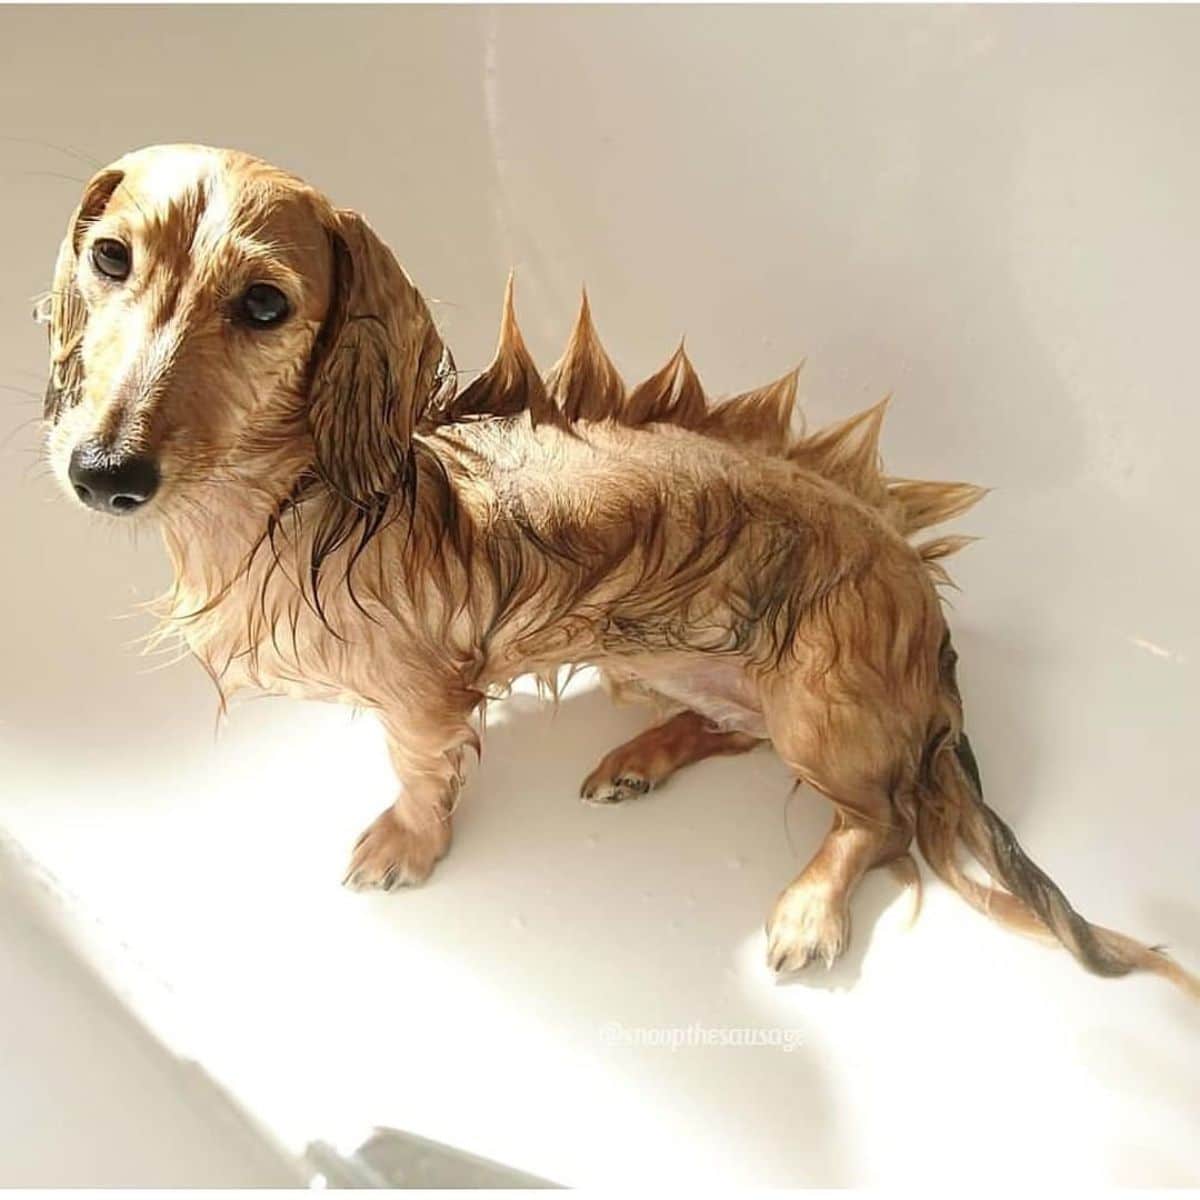 wet brown dachshund in a bathtub with the fur on its shaped into dinosaur scales